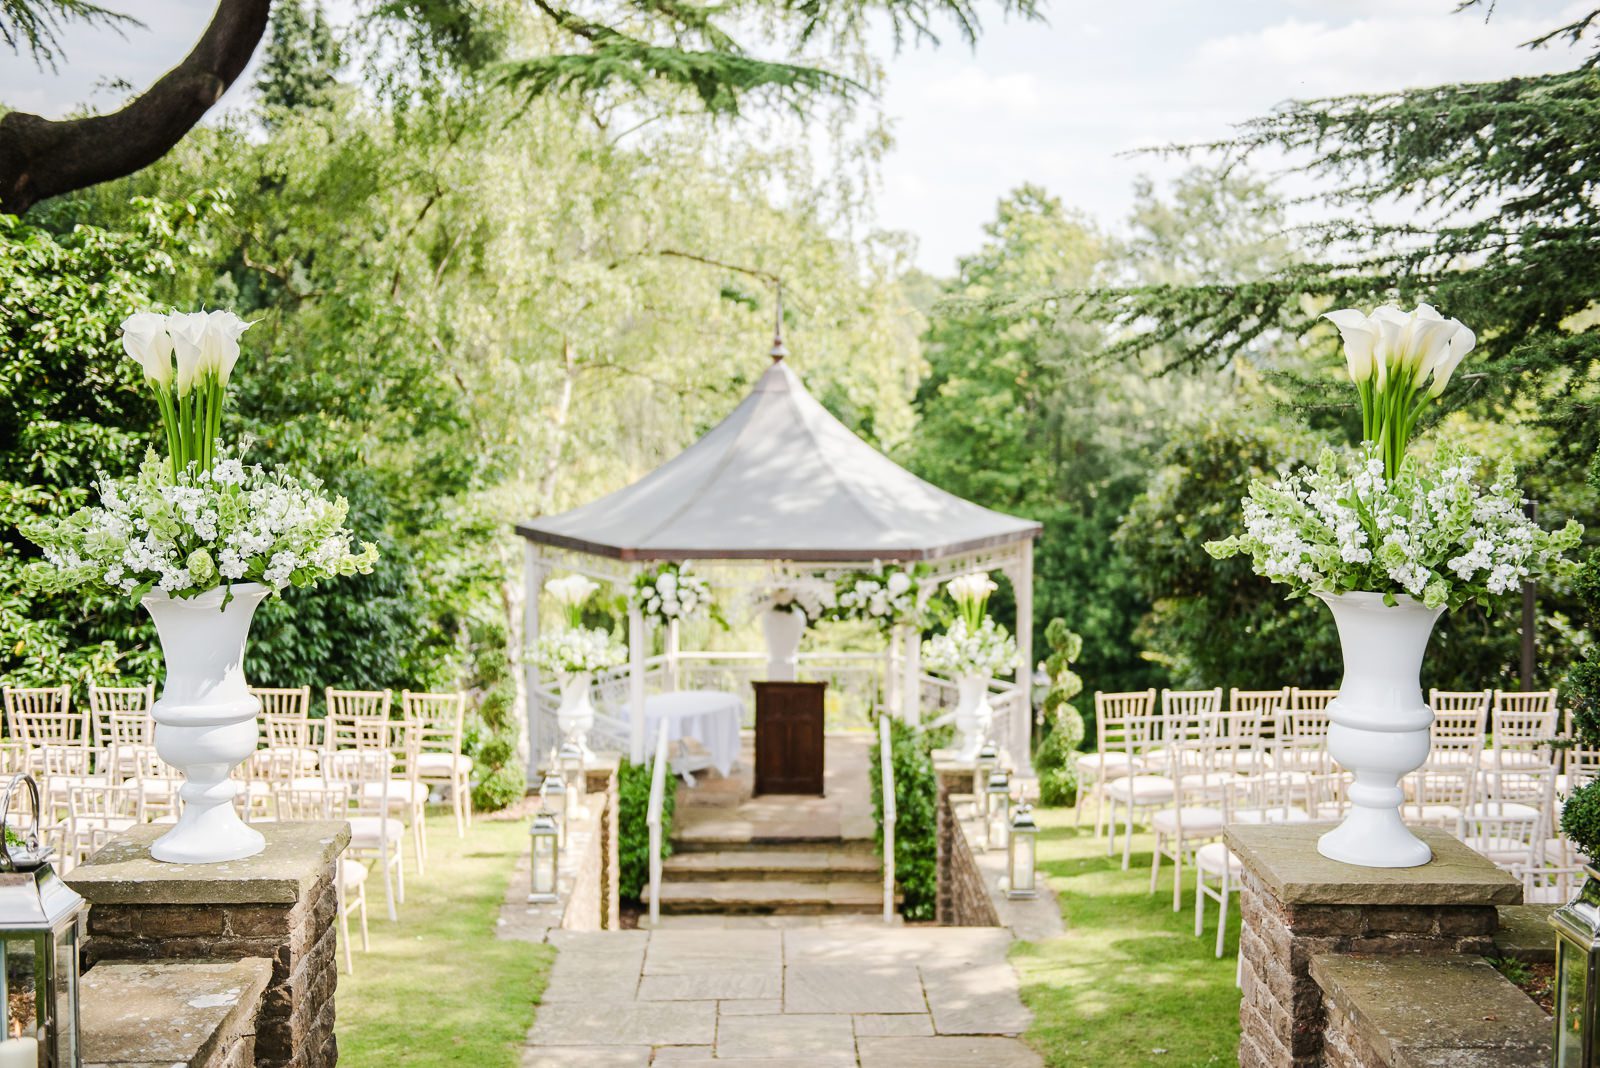 Elegant outdoor pavilion decorated with white lilies and stocks for a same sex Summer wedding in Surrey.